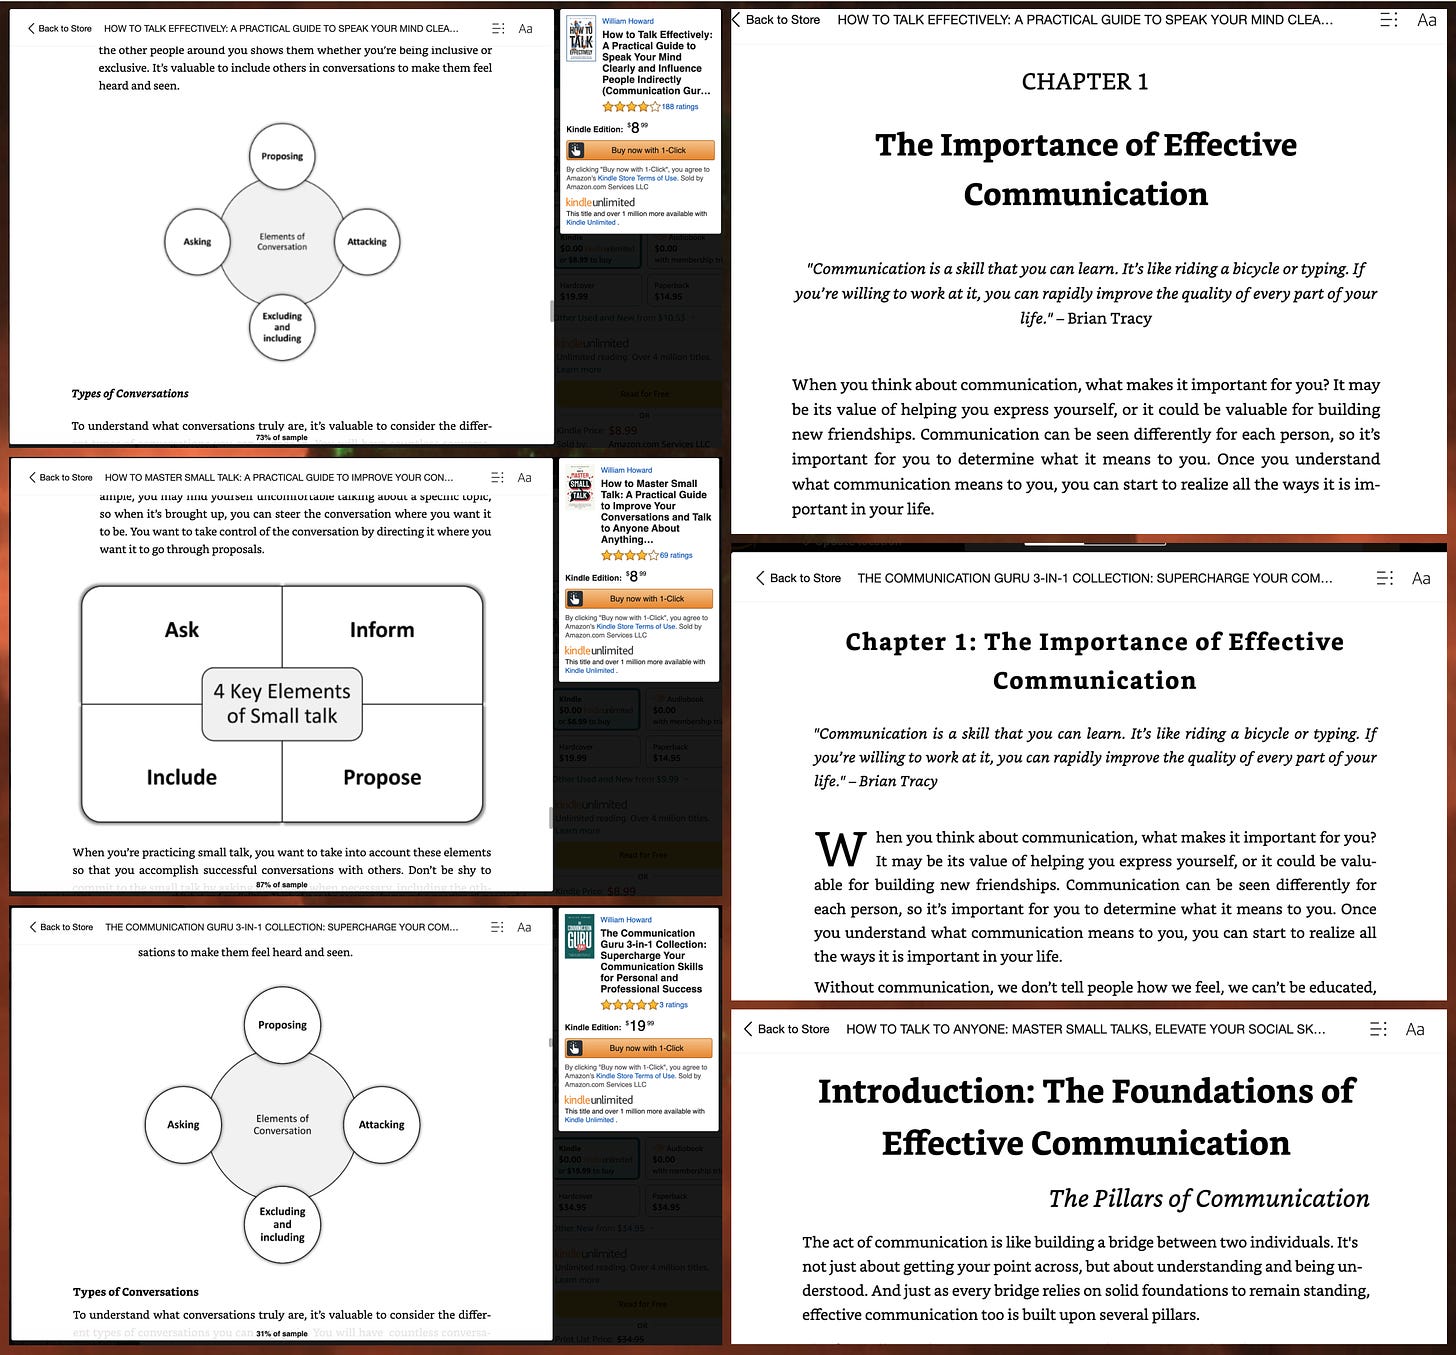 screenshots of similar content from multiple books by GAN-faced authors